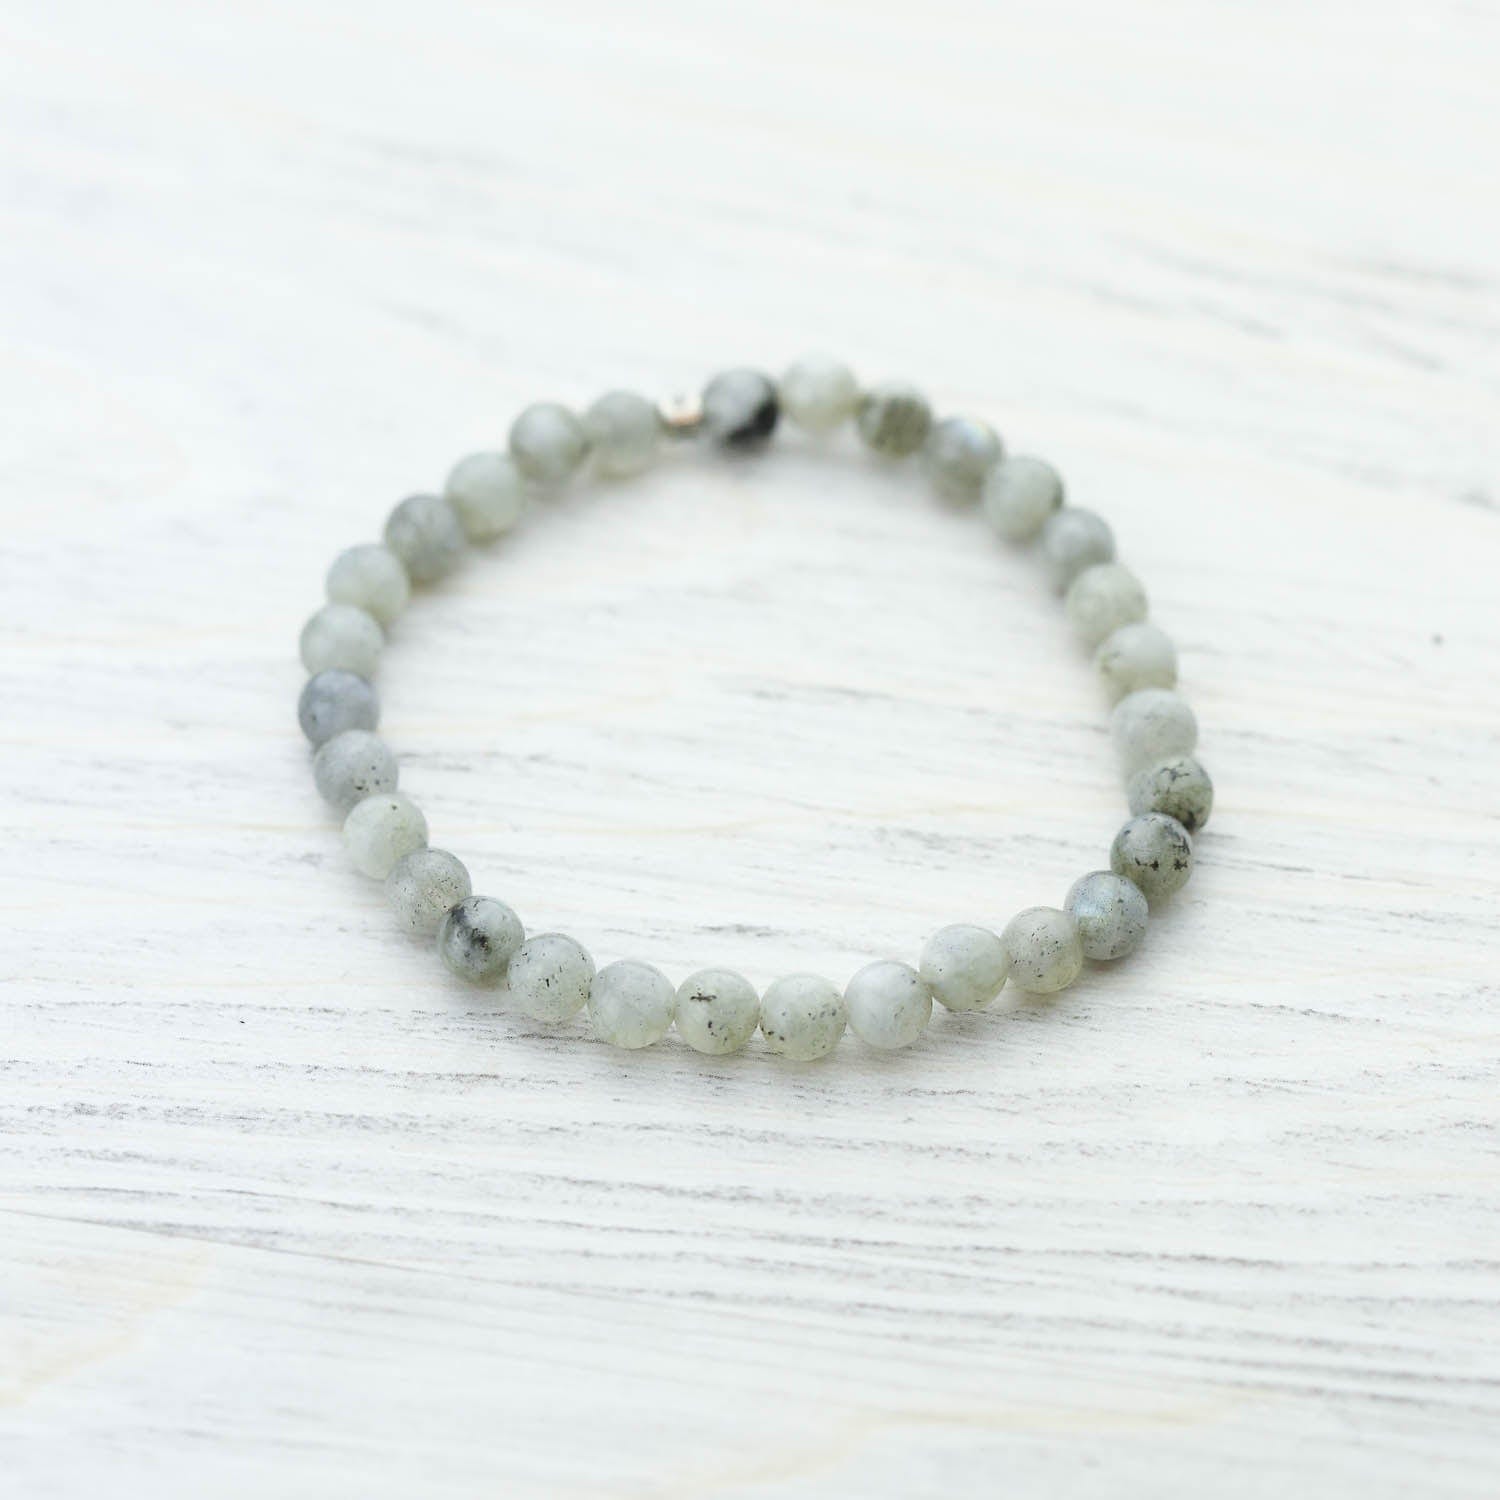 Spiritual Energy Bracelet - Handcrafted with Thai Silver - DharmaShop